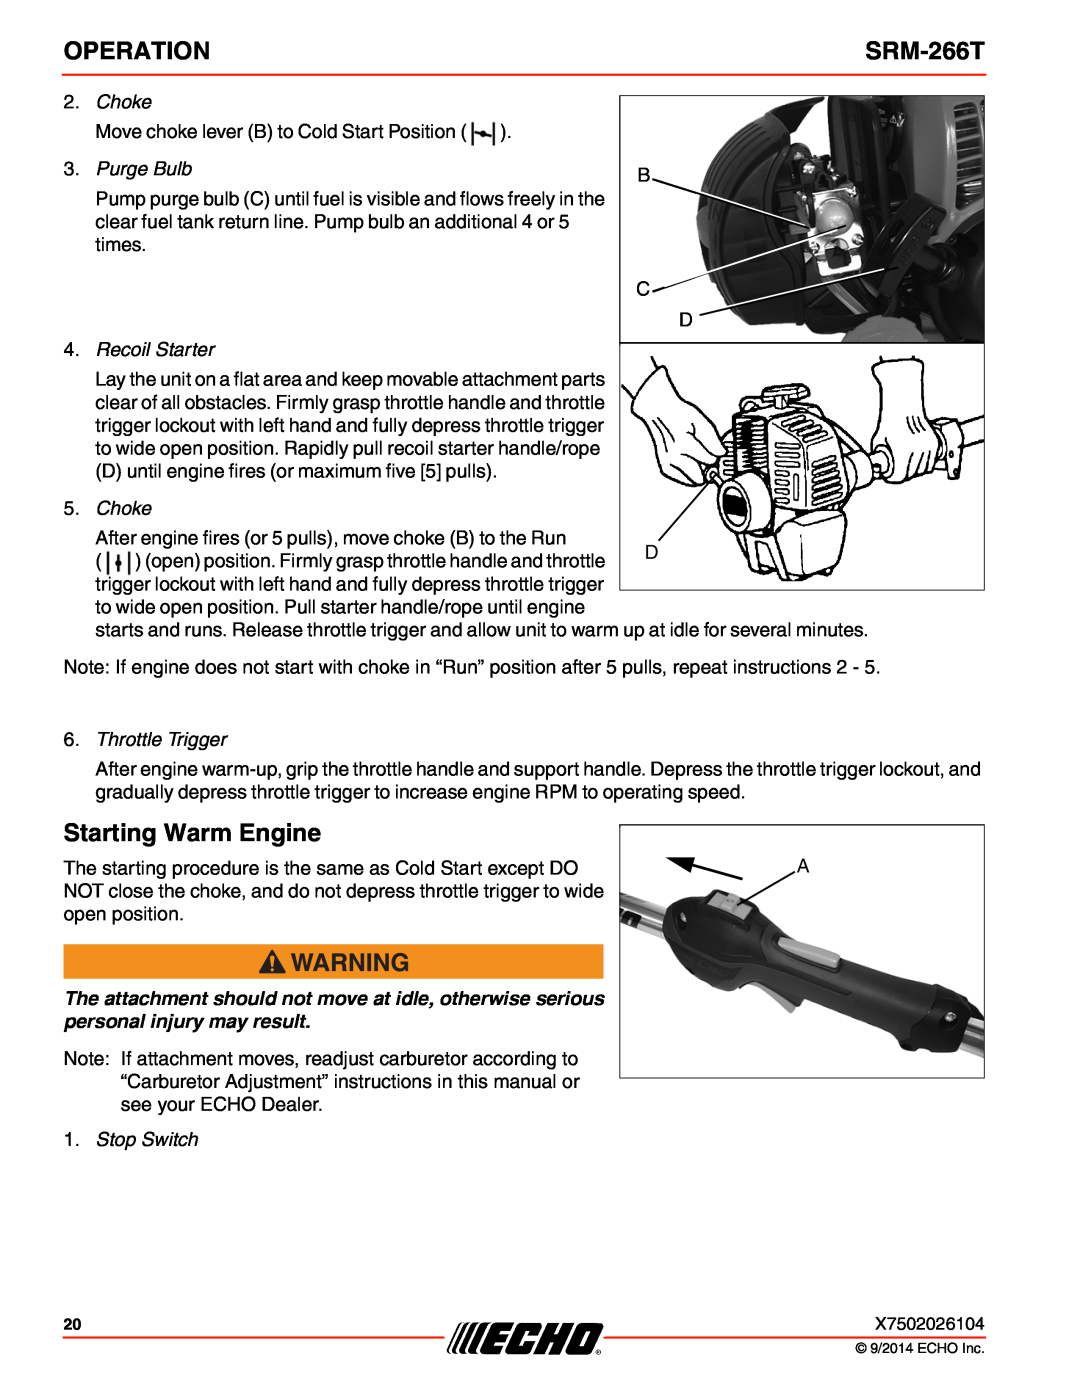 Echo SRM-266T specifications Starting Warm Engine, Operation 